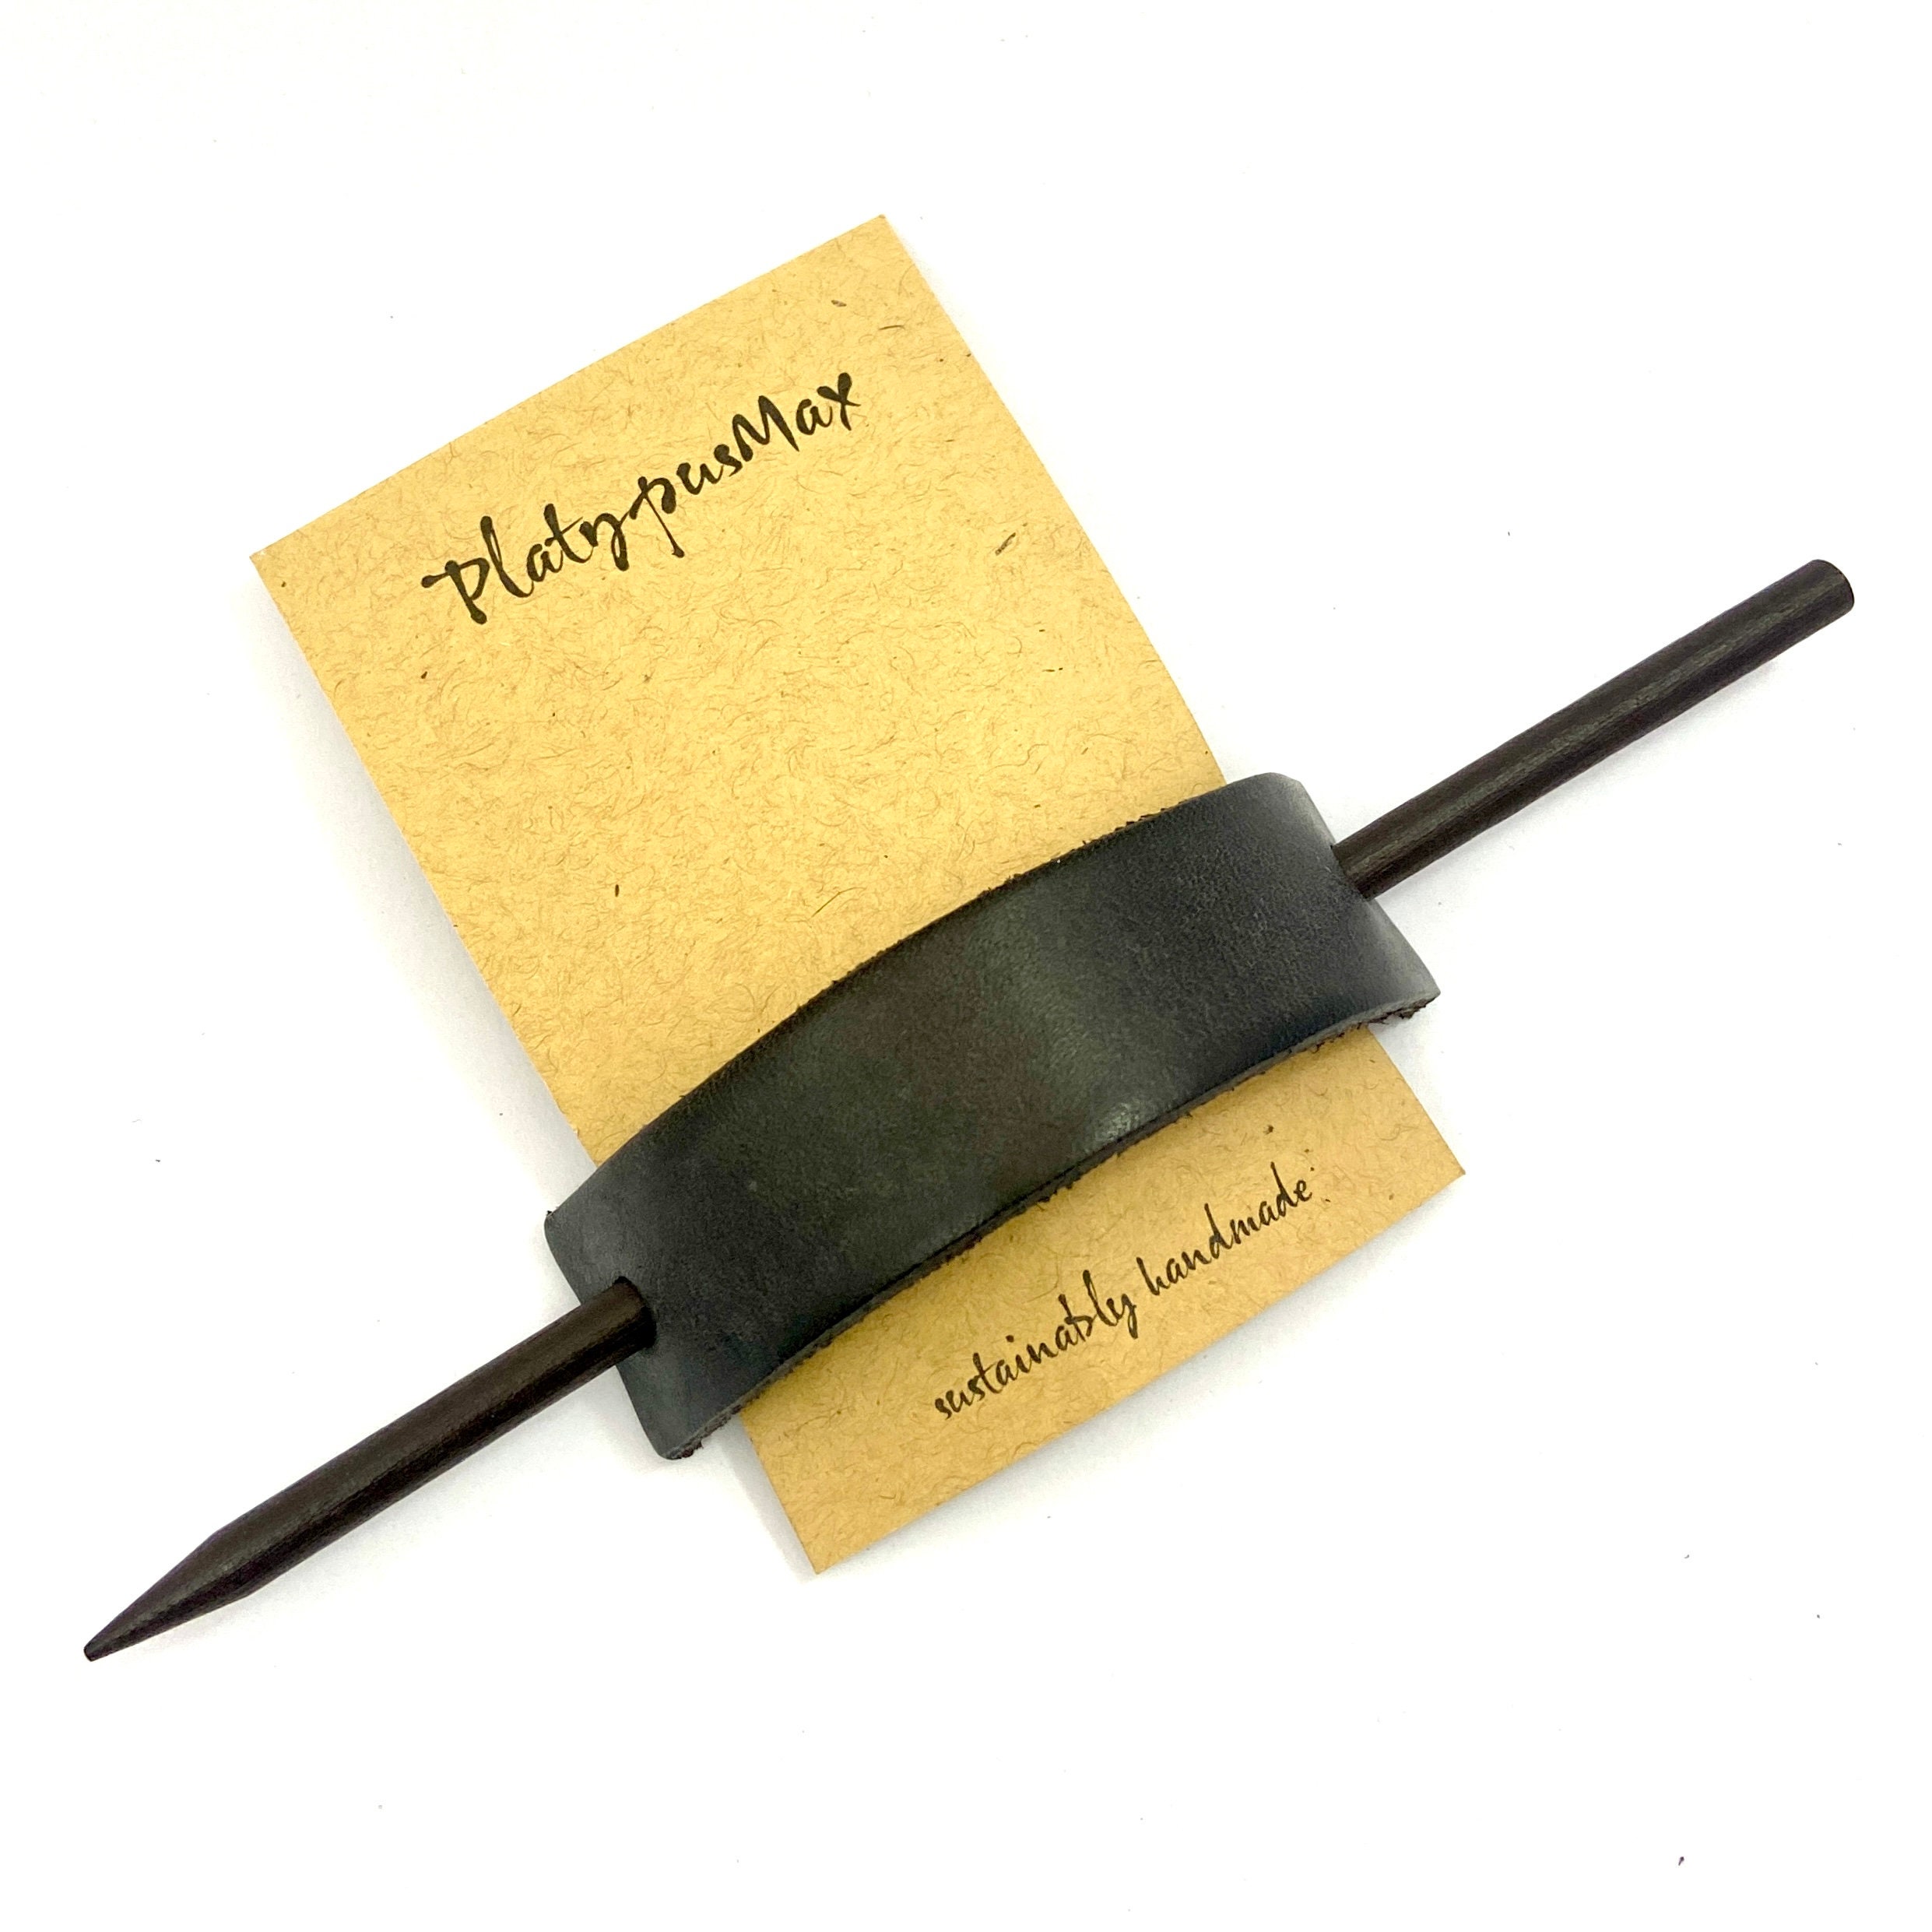 Leather Hair Barrette or Ponytail Holder Blanks with Sticks Pack